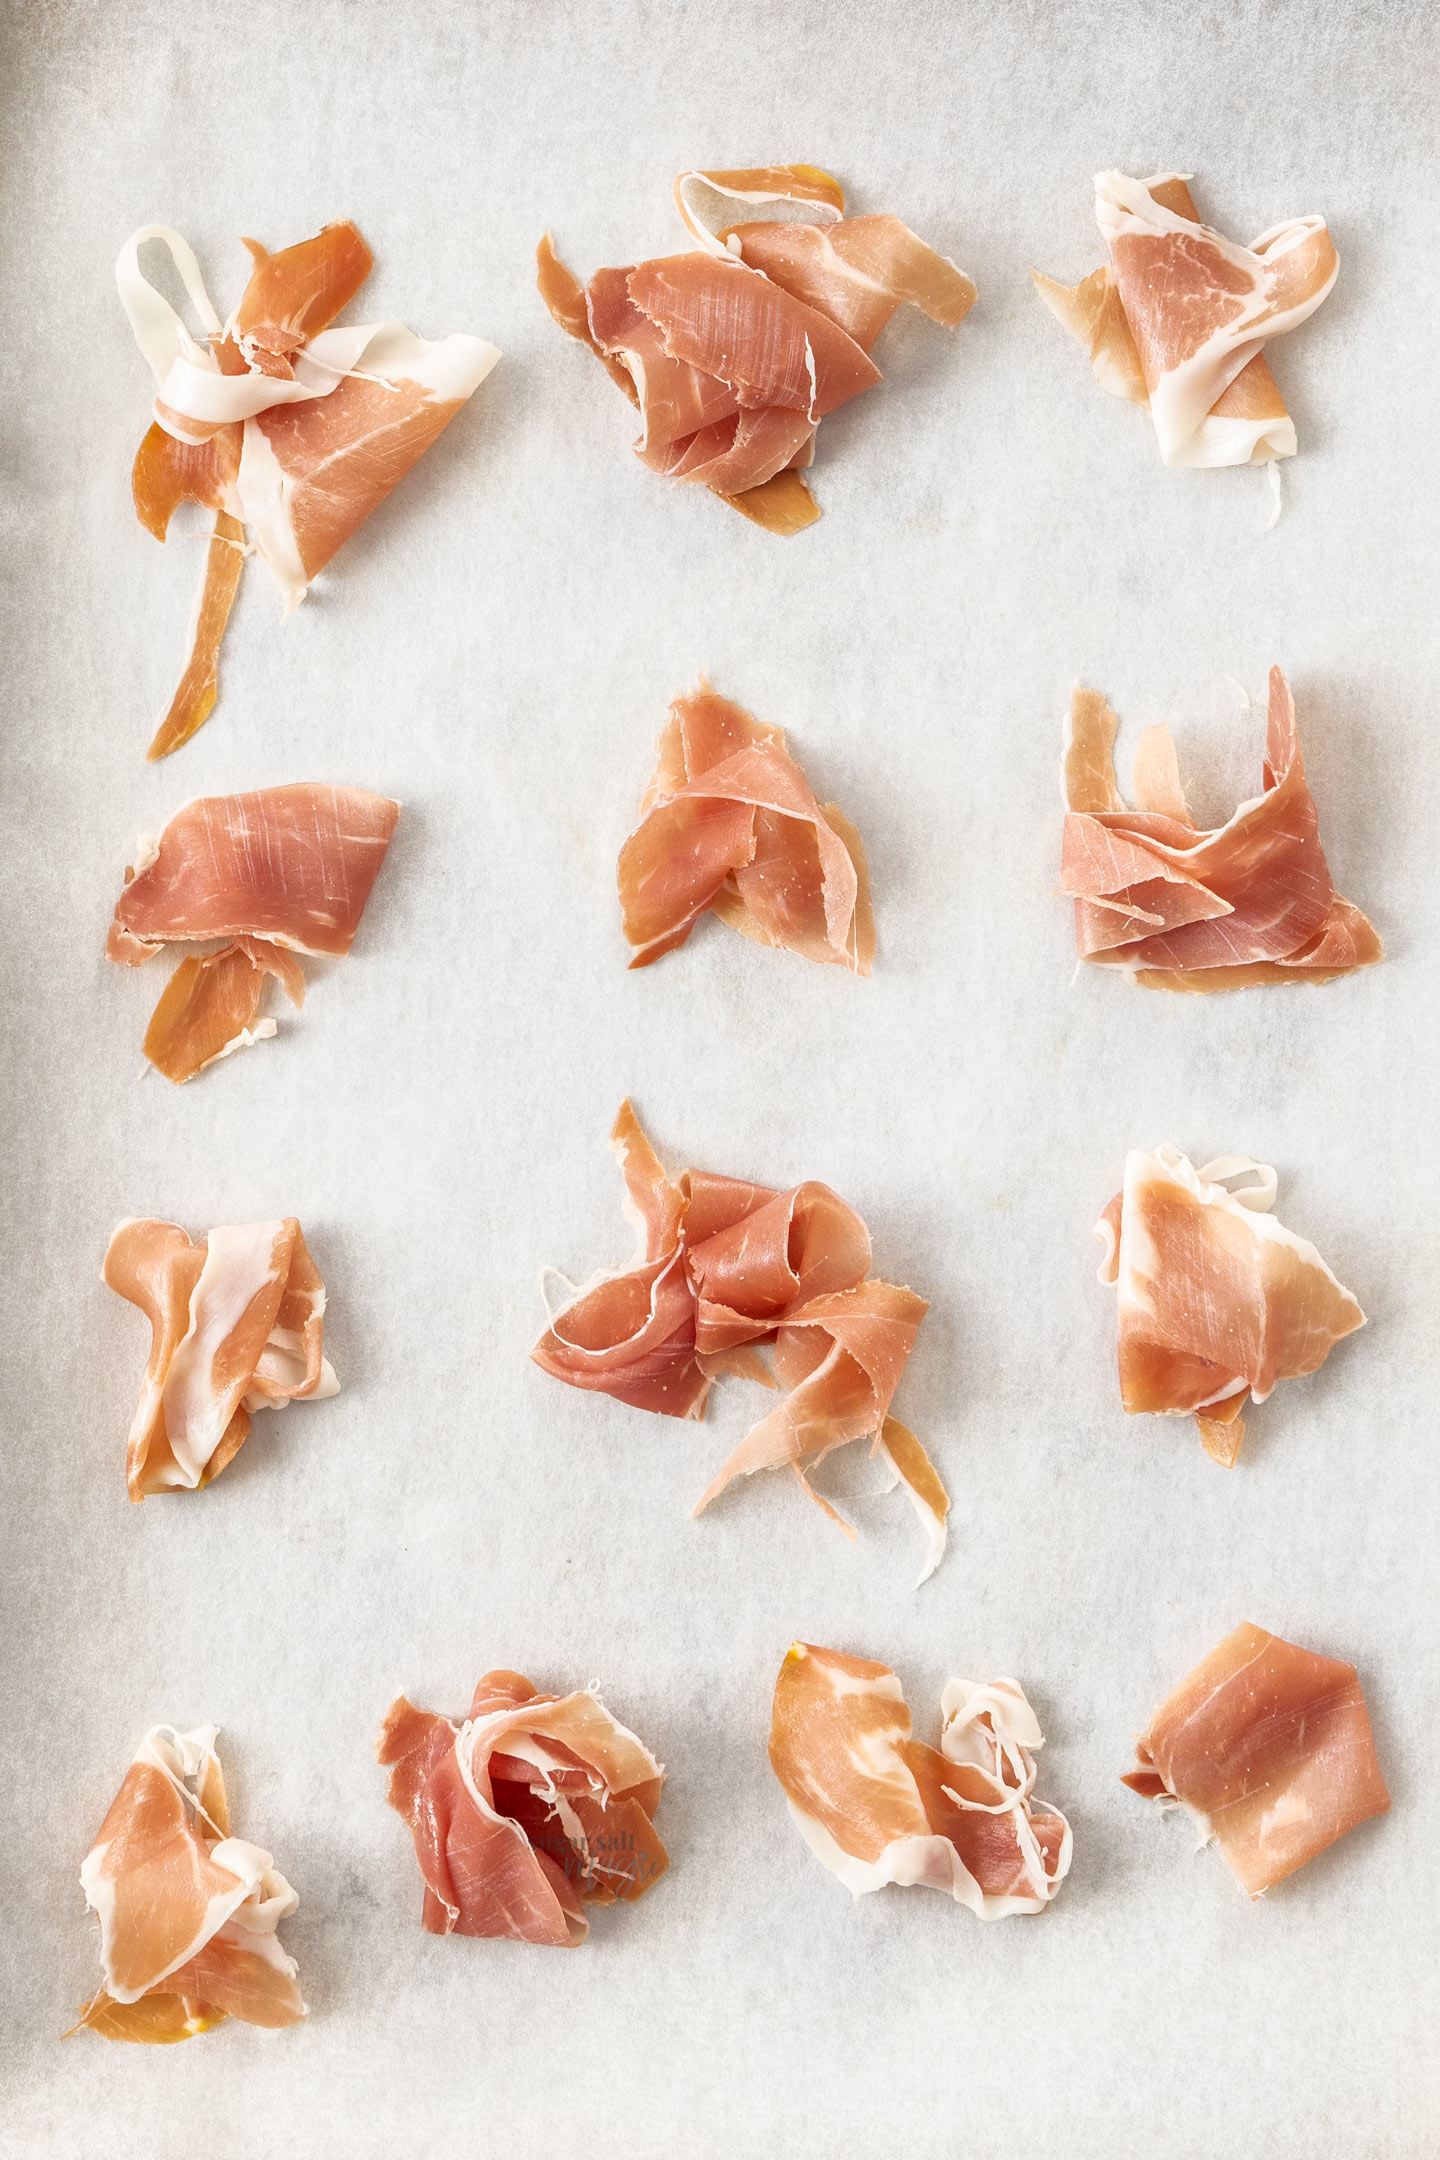 Small piles of prosciutto on a baking tray ready to bake.